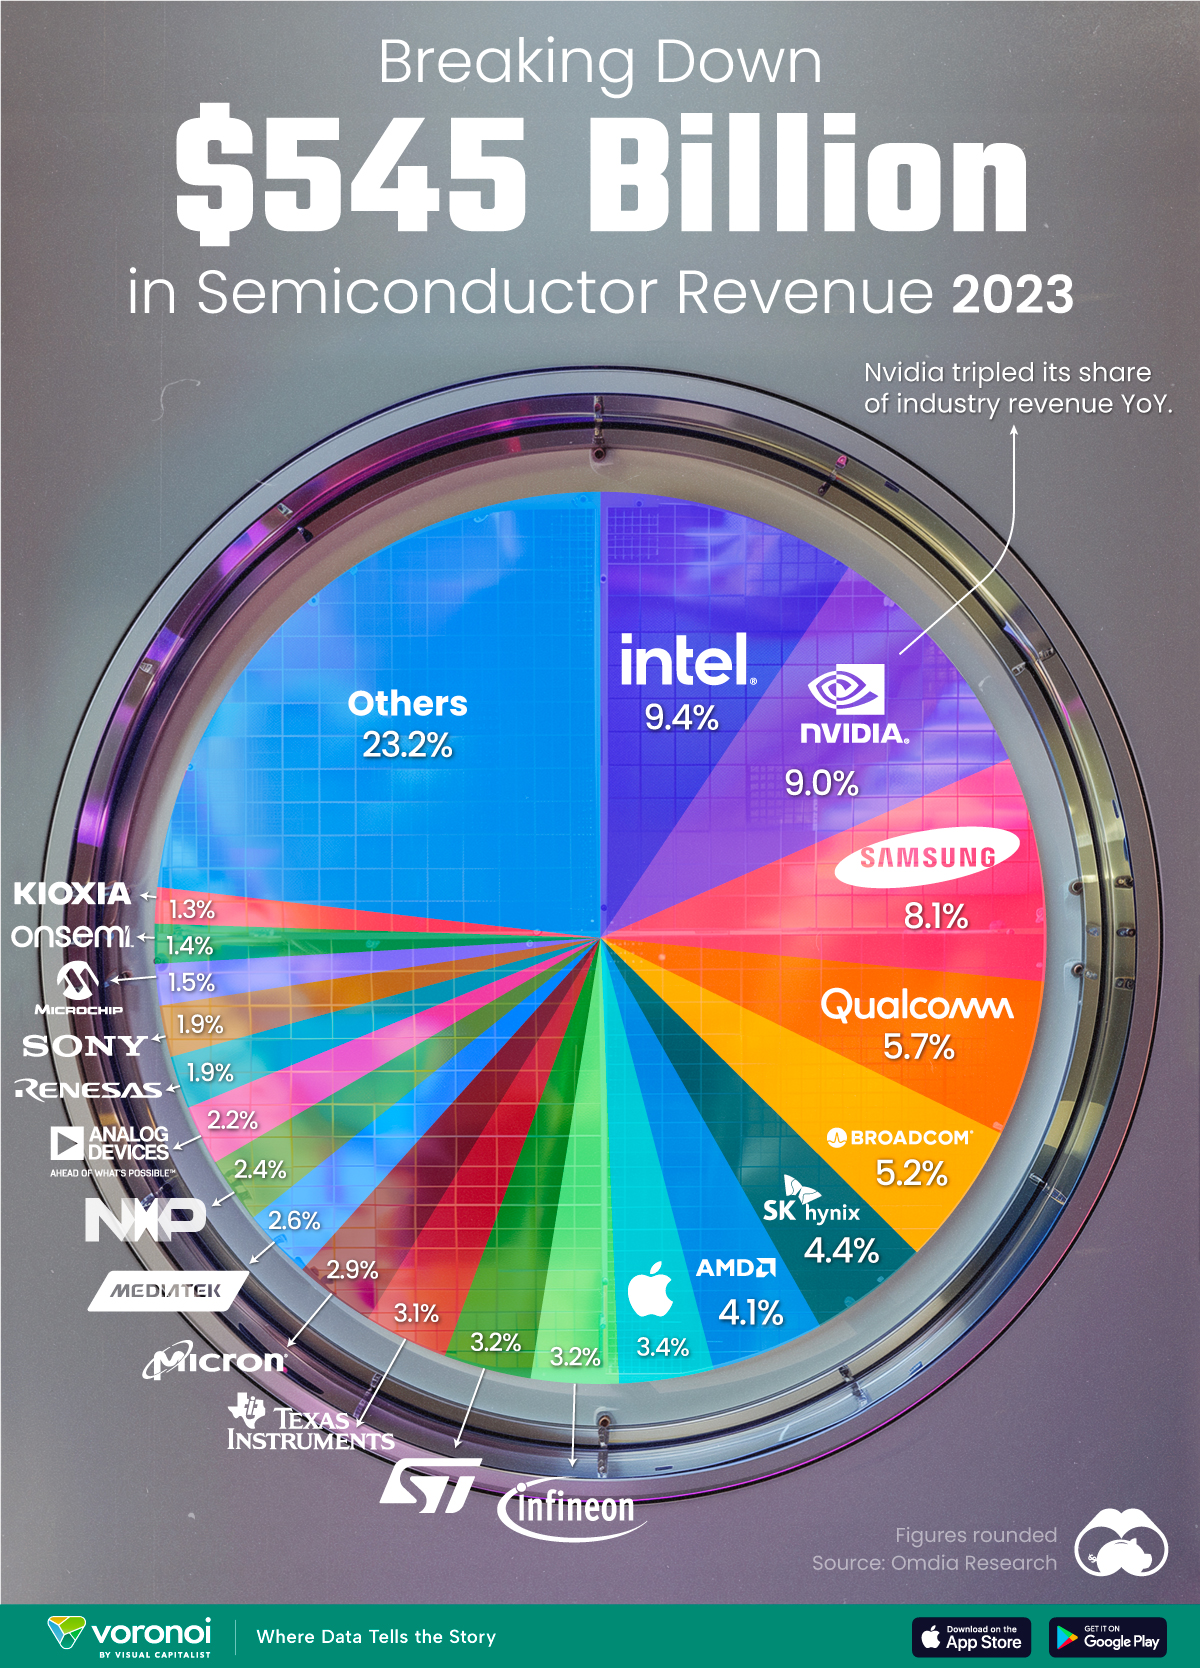 A pie chart showing the biggest semiconductor companies by the percentage share of the industry’s revenues in 2023.